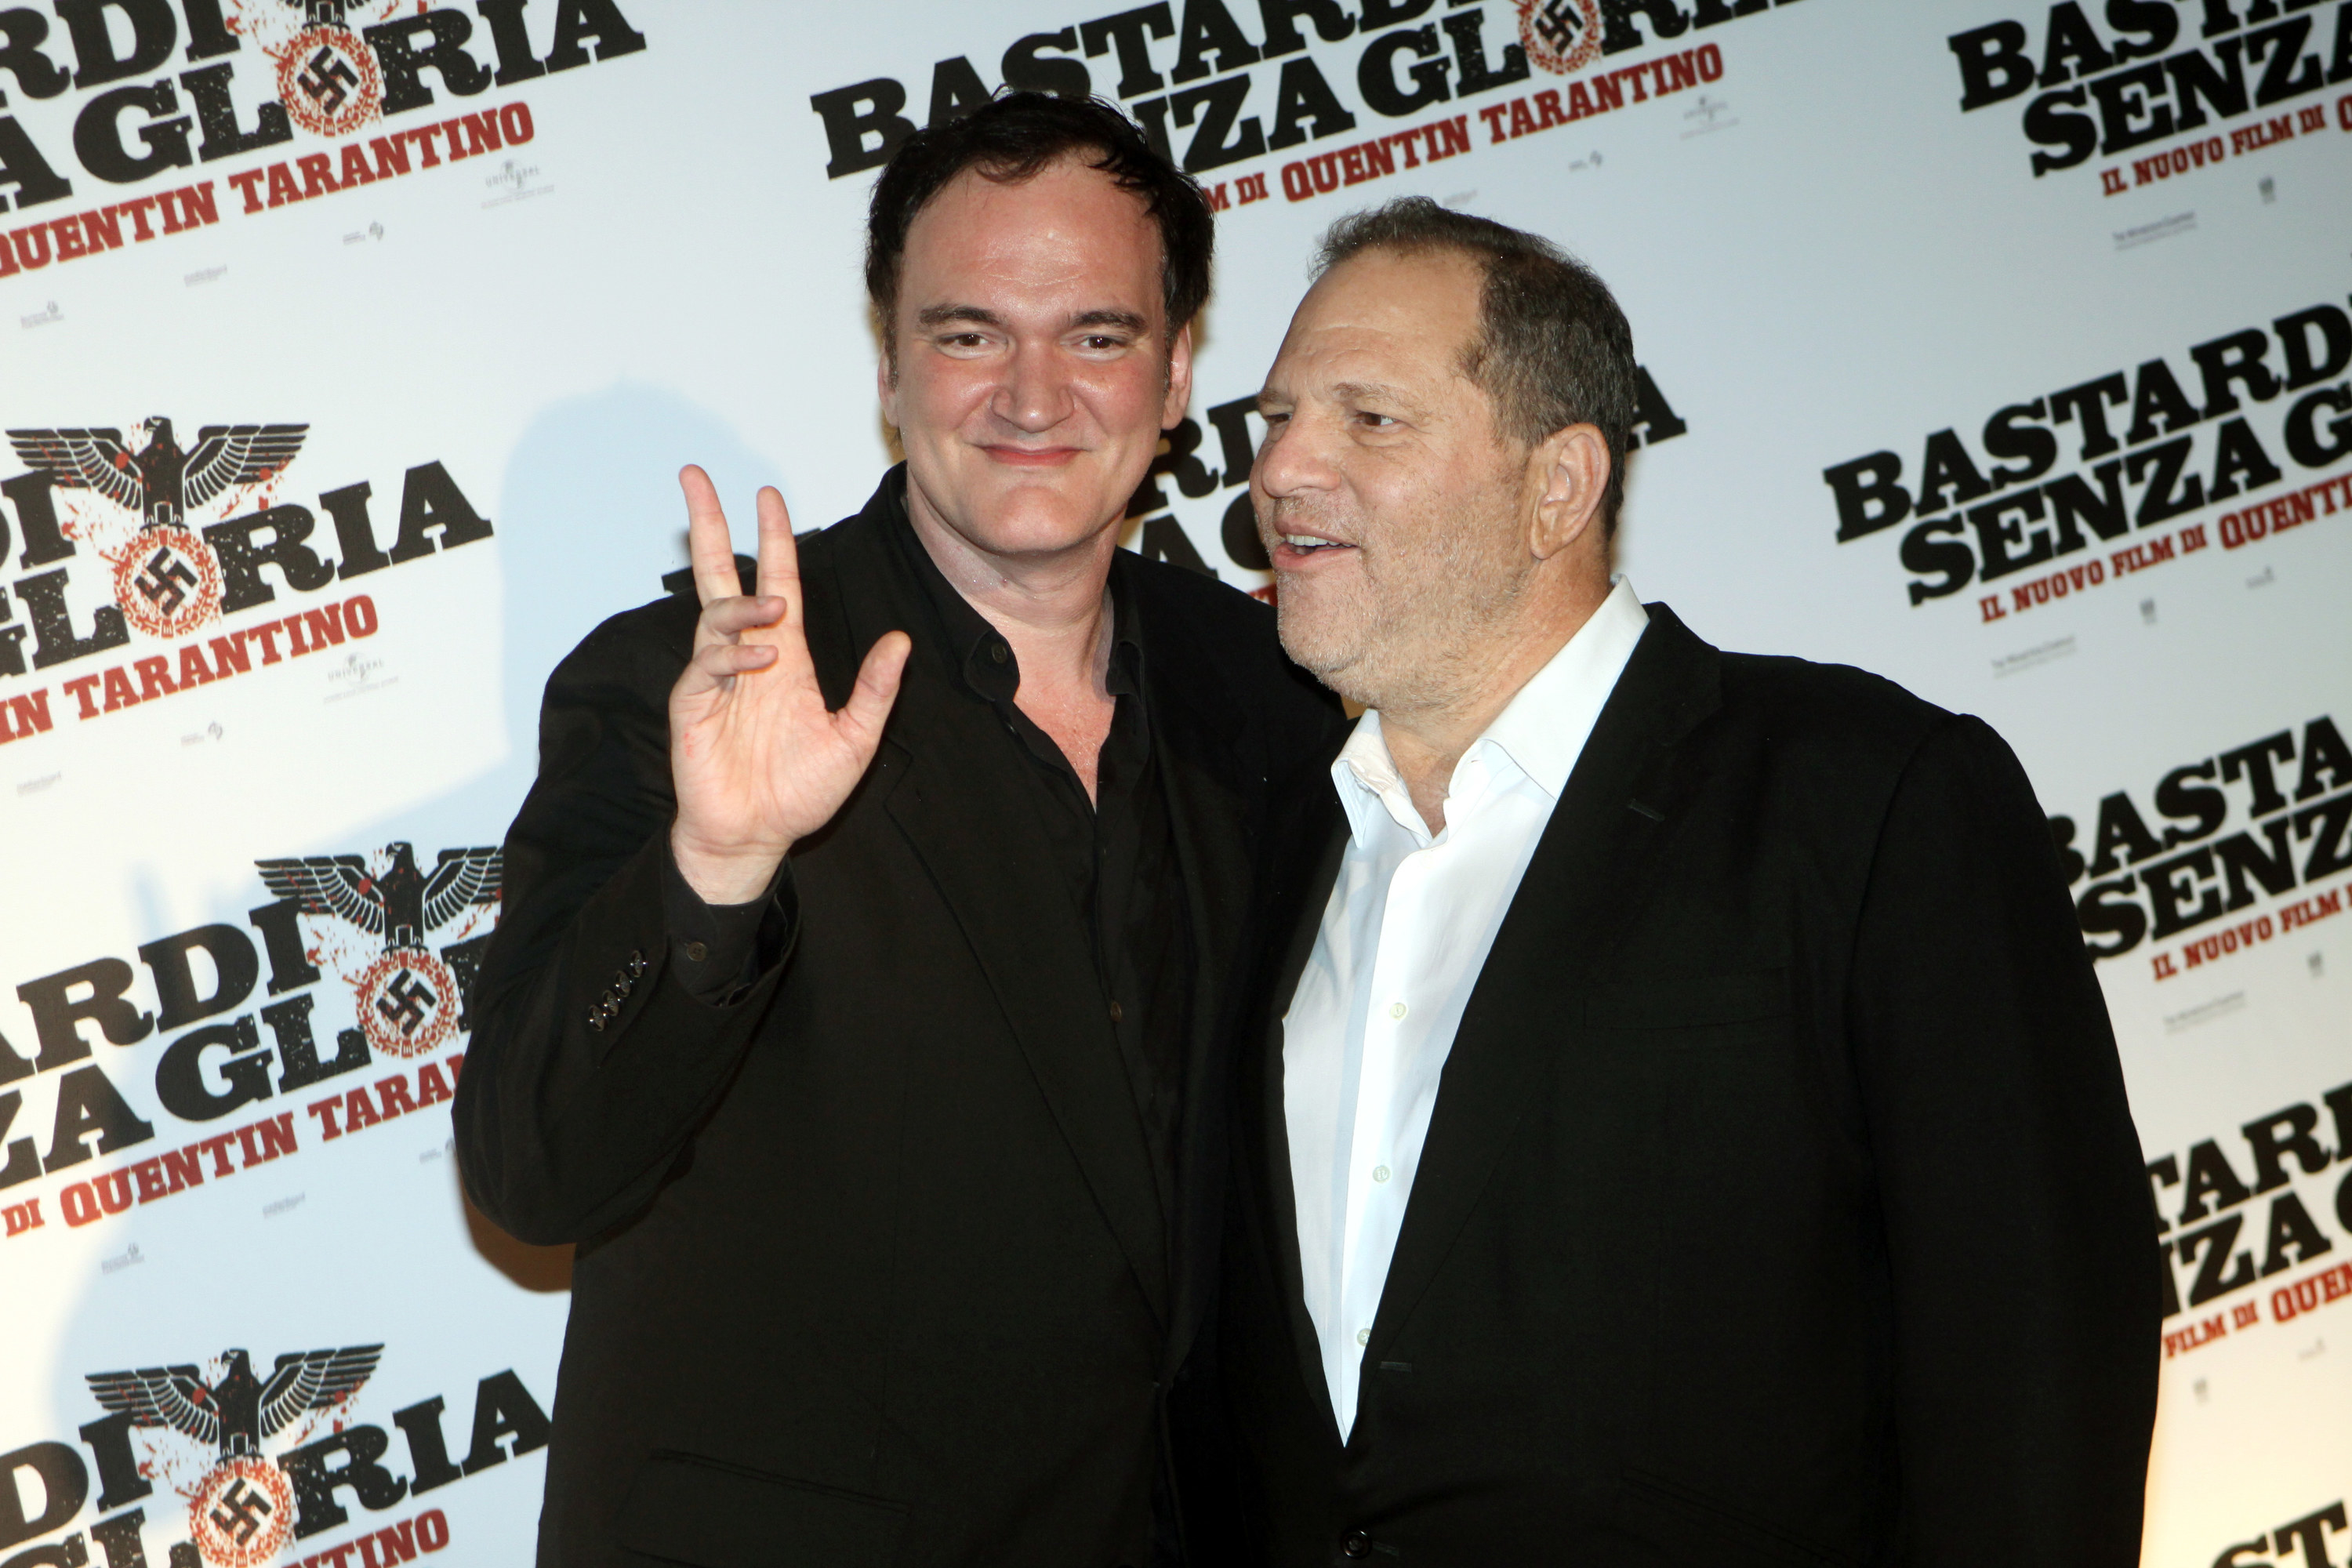 Tarantino waves to the camera with his arm around Weinstein in 2009